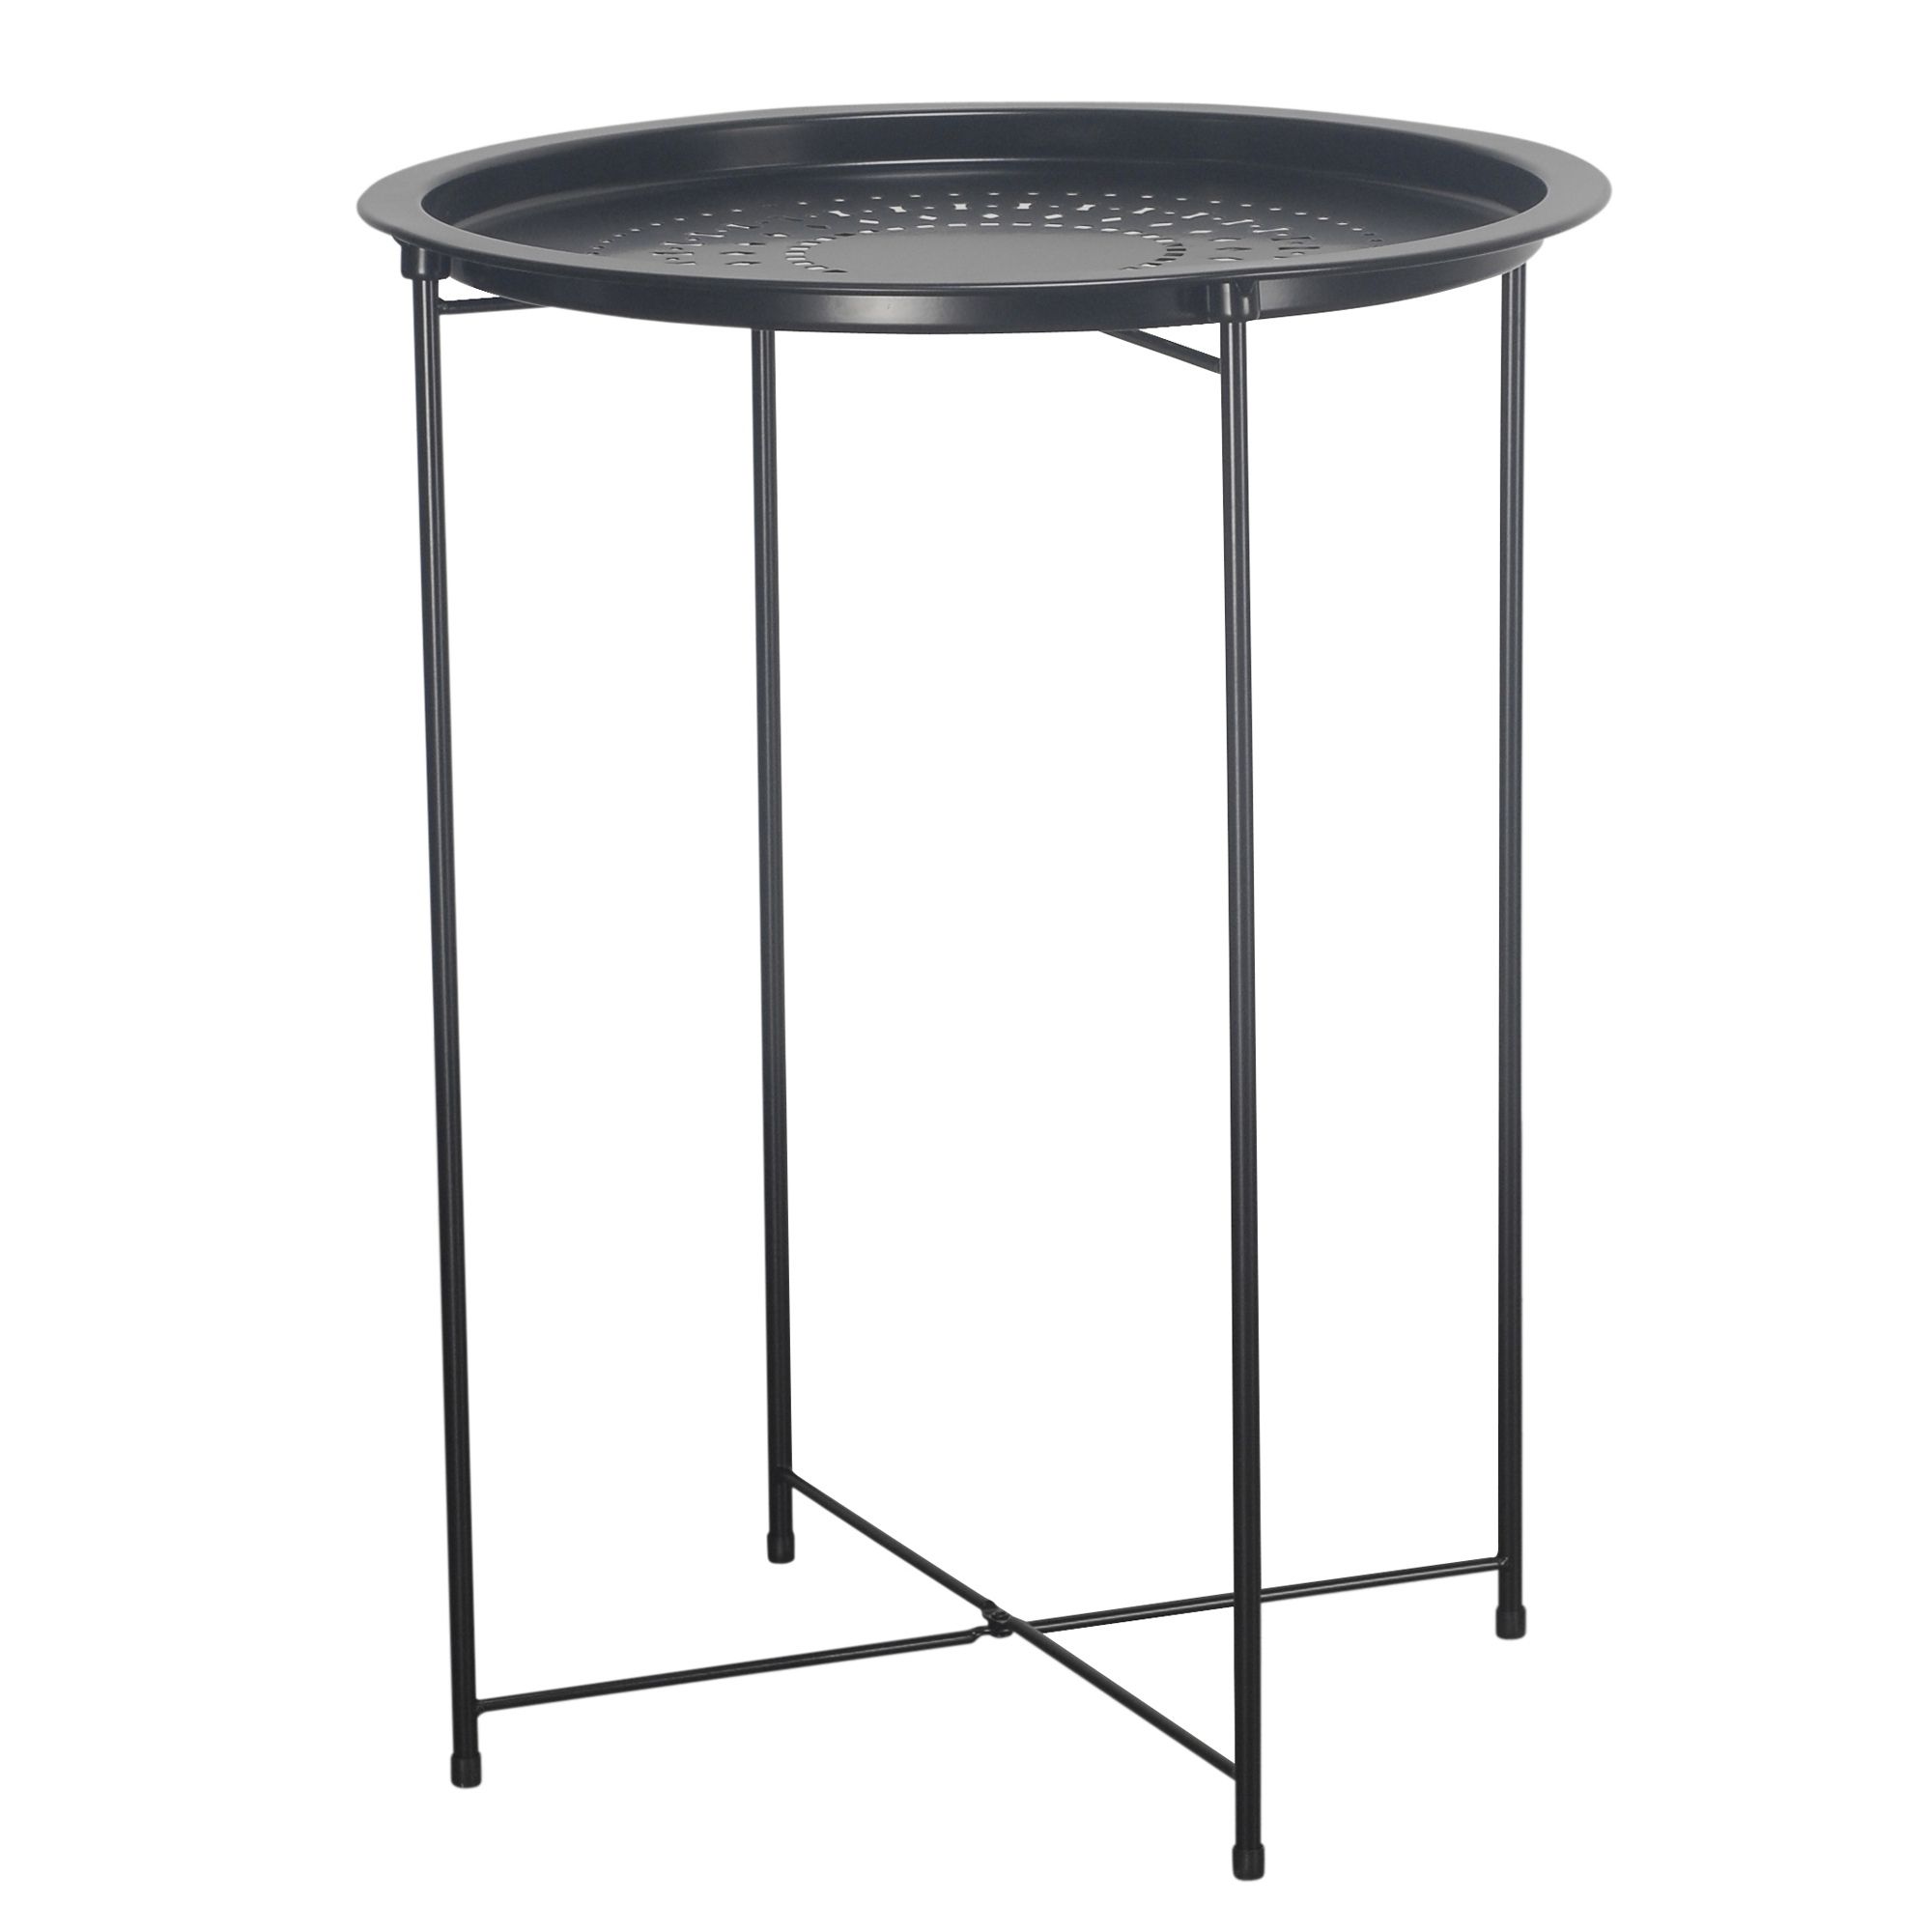 Folding Metal Round Bistro Coffee Table Patio Indoor Outdoor Furniture Intended For Round Steel Patio Coffee Tables (View 13 of 20)